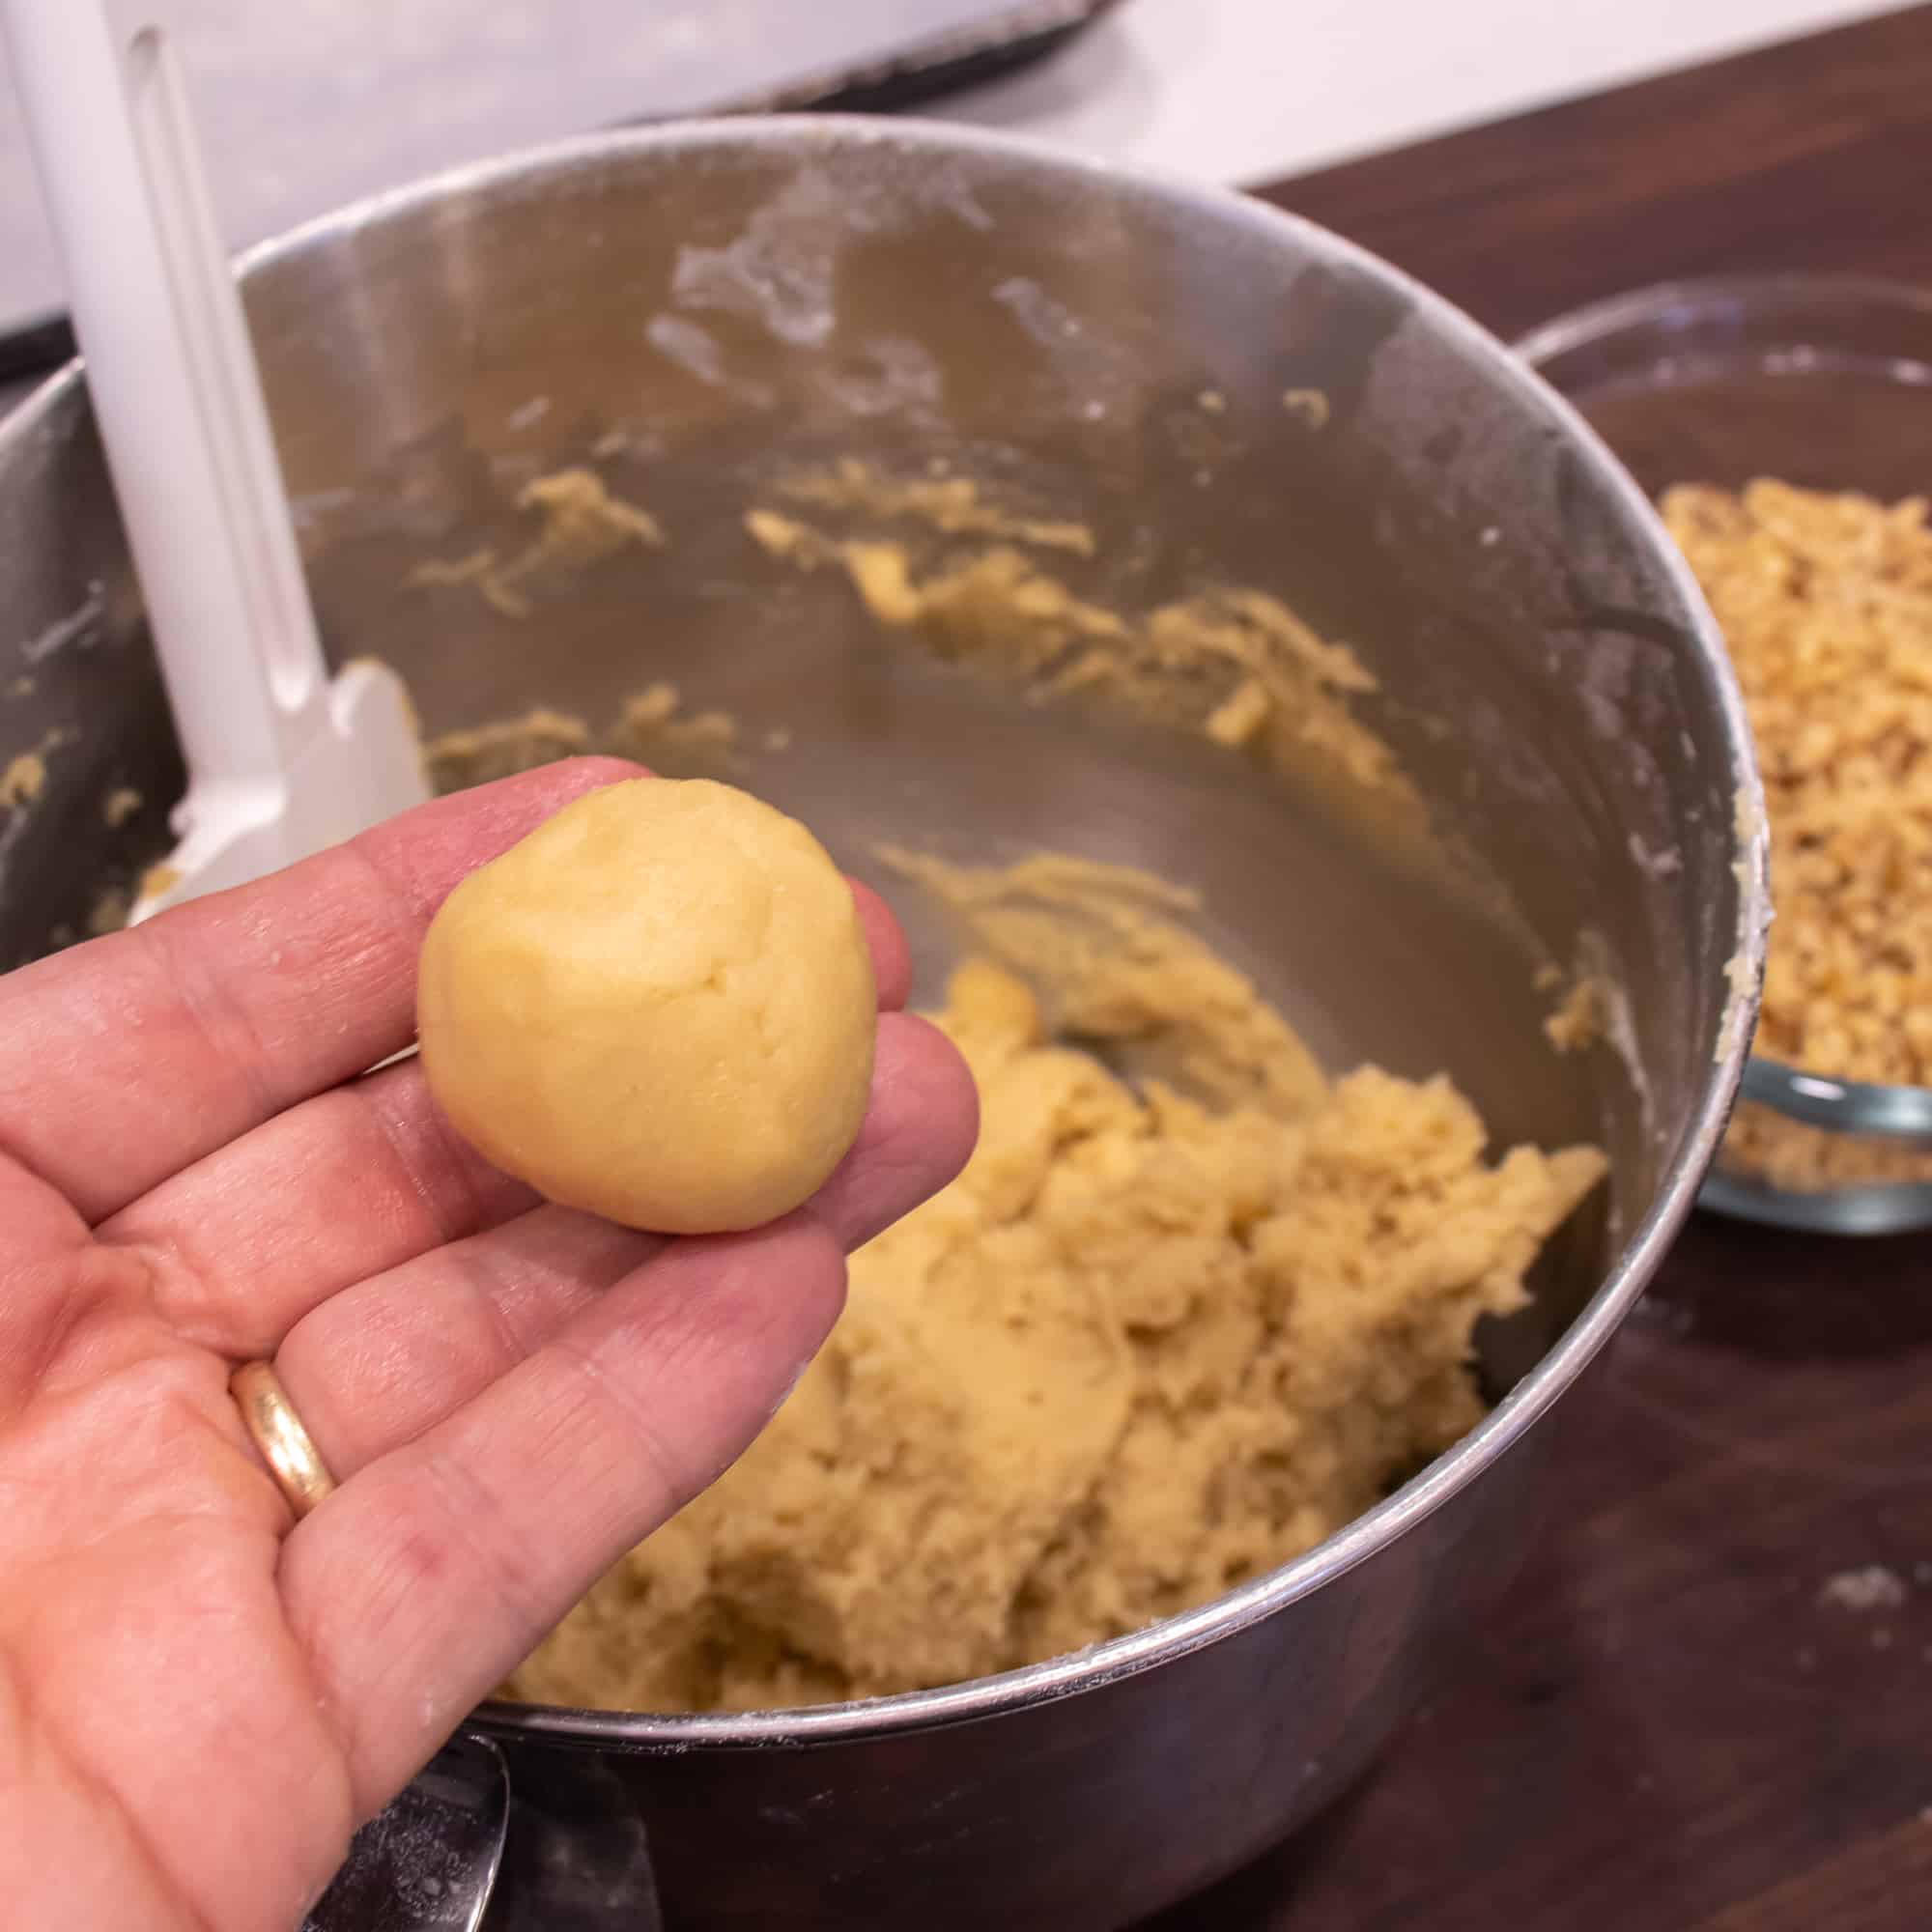 Roll some of the dough into a small ball.